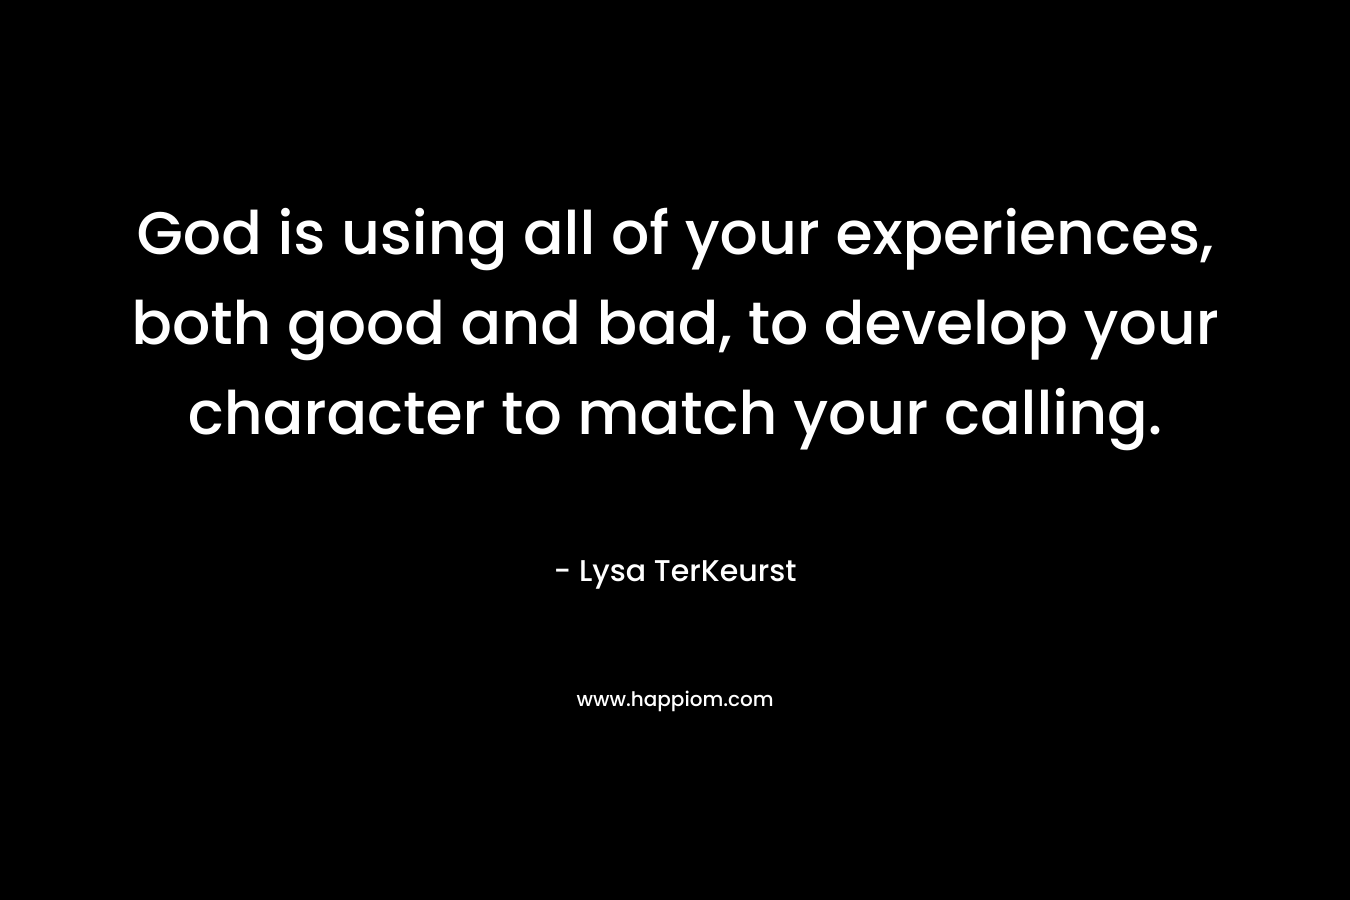 God is using all of your experiences, both good and bad, to develop your character to match your calling. – Lysa TerKeurst